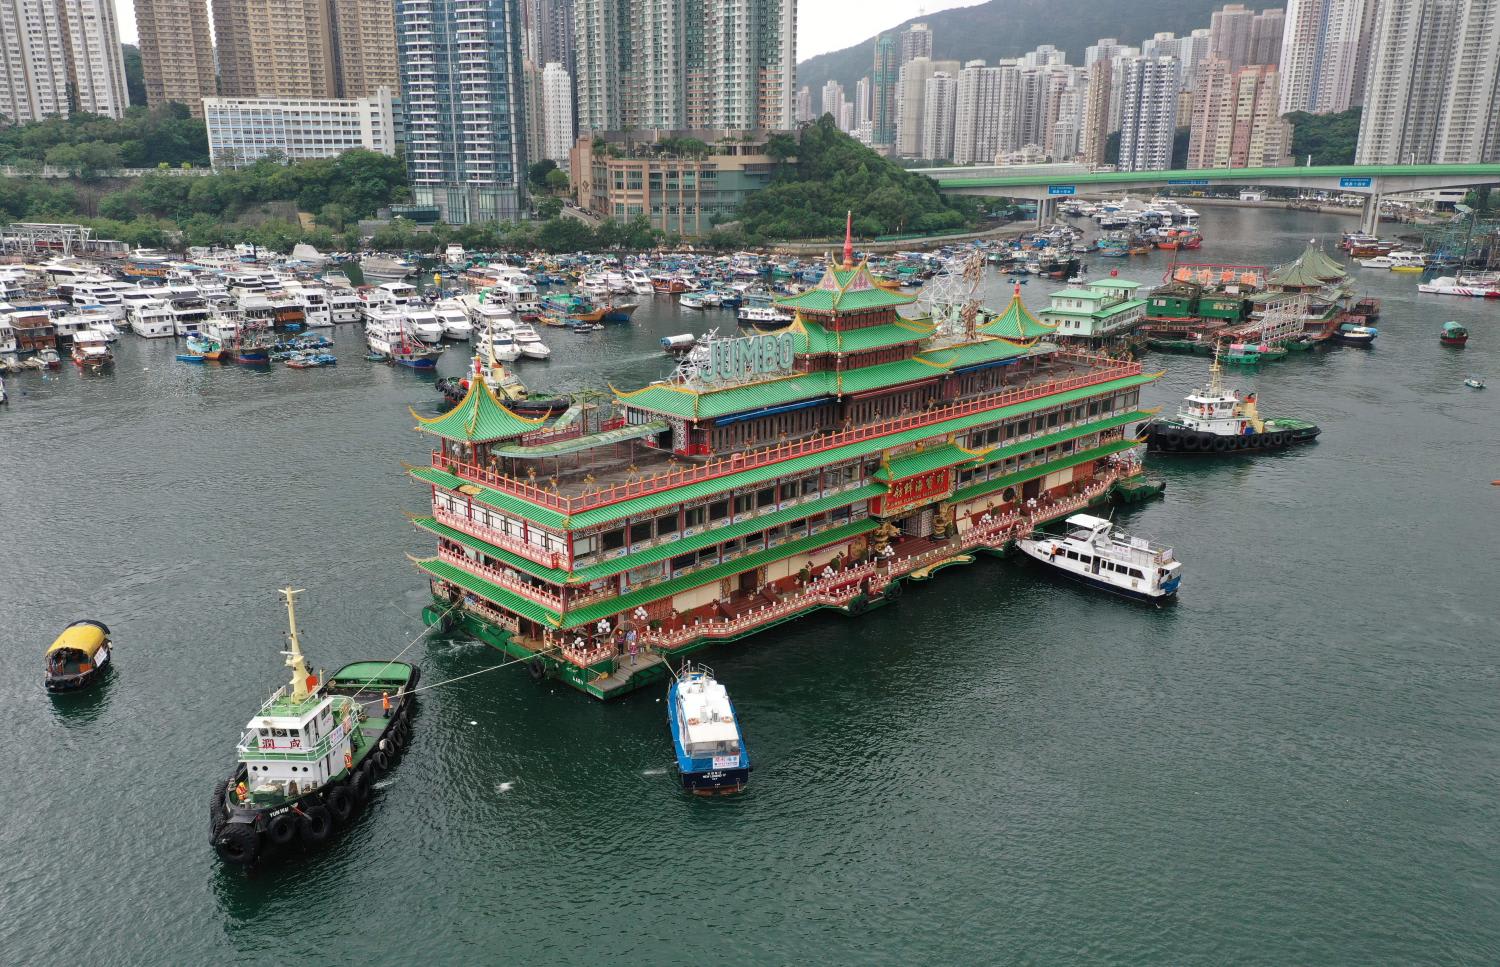 This file photo taken on June 14, 2022 shows an aerial view of Hong Kong's Jumbo Floating Restaurant being towed out of Aberdeen Harbour.